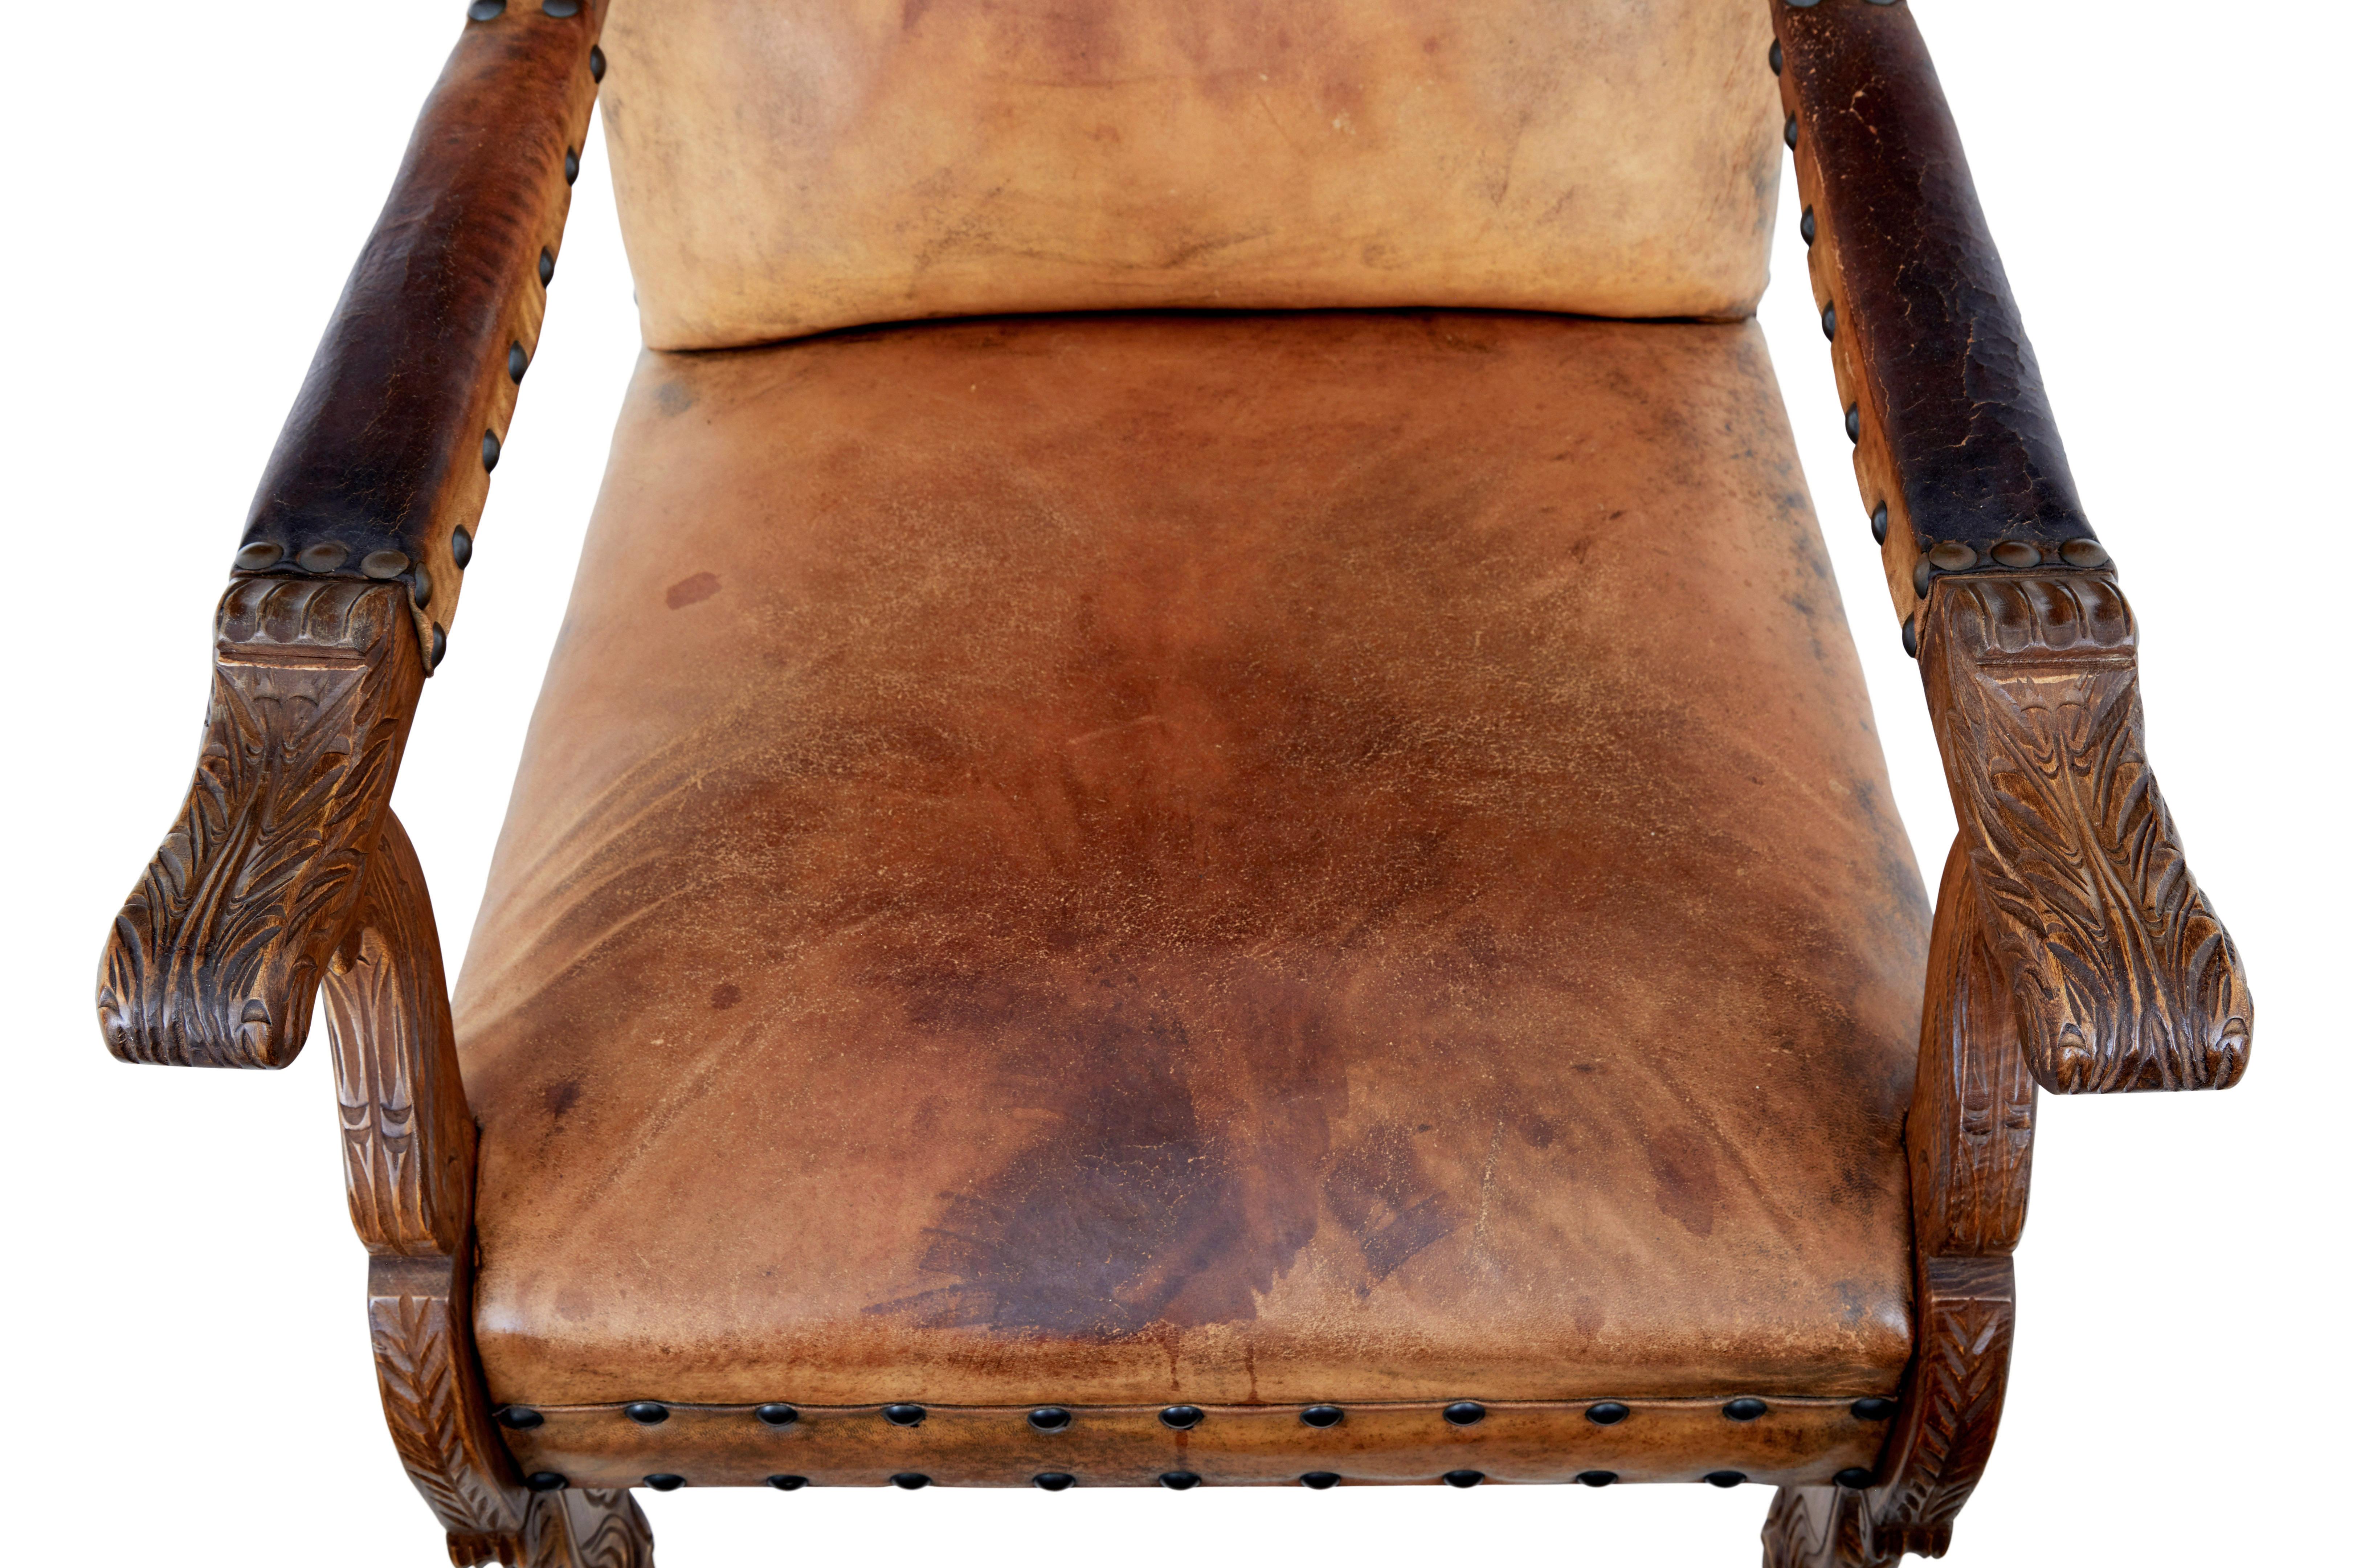 Pair of 19th century oak and leather armchairs circa 1890.

Good quality pair of show frame wing back armchairs.  Complete with original brown leather which still shows traces of an embossed pattern on the back rest.

Art nouveau feel to the carved